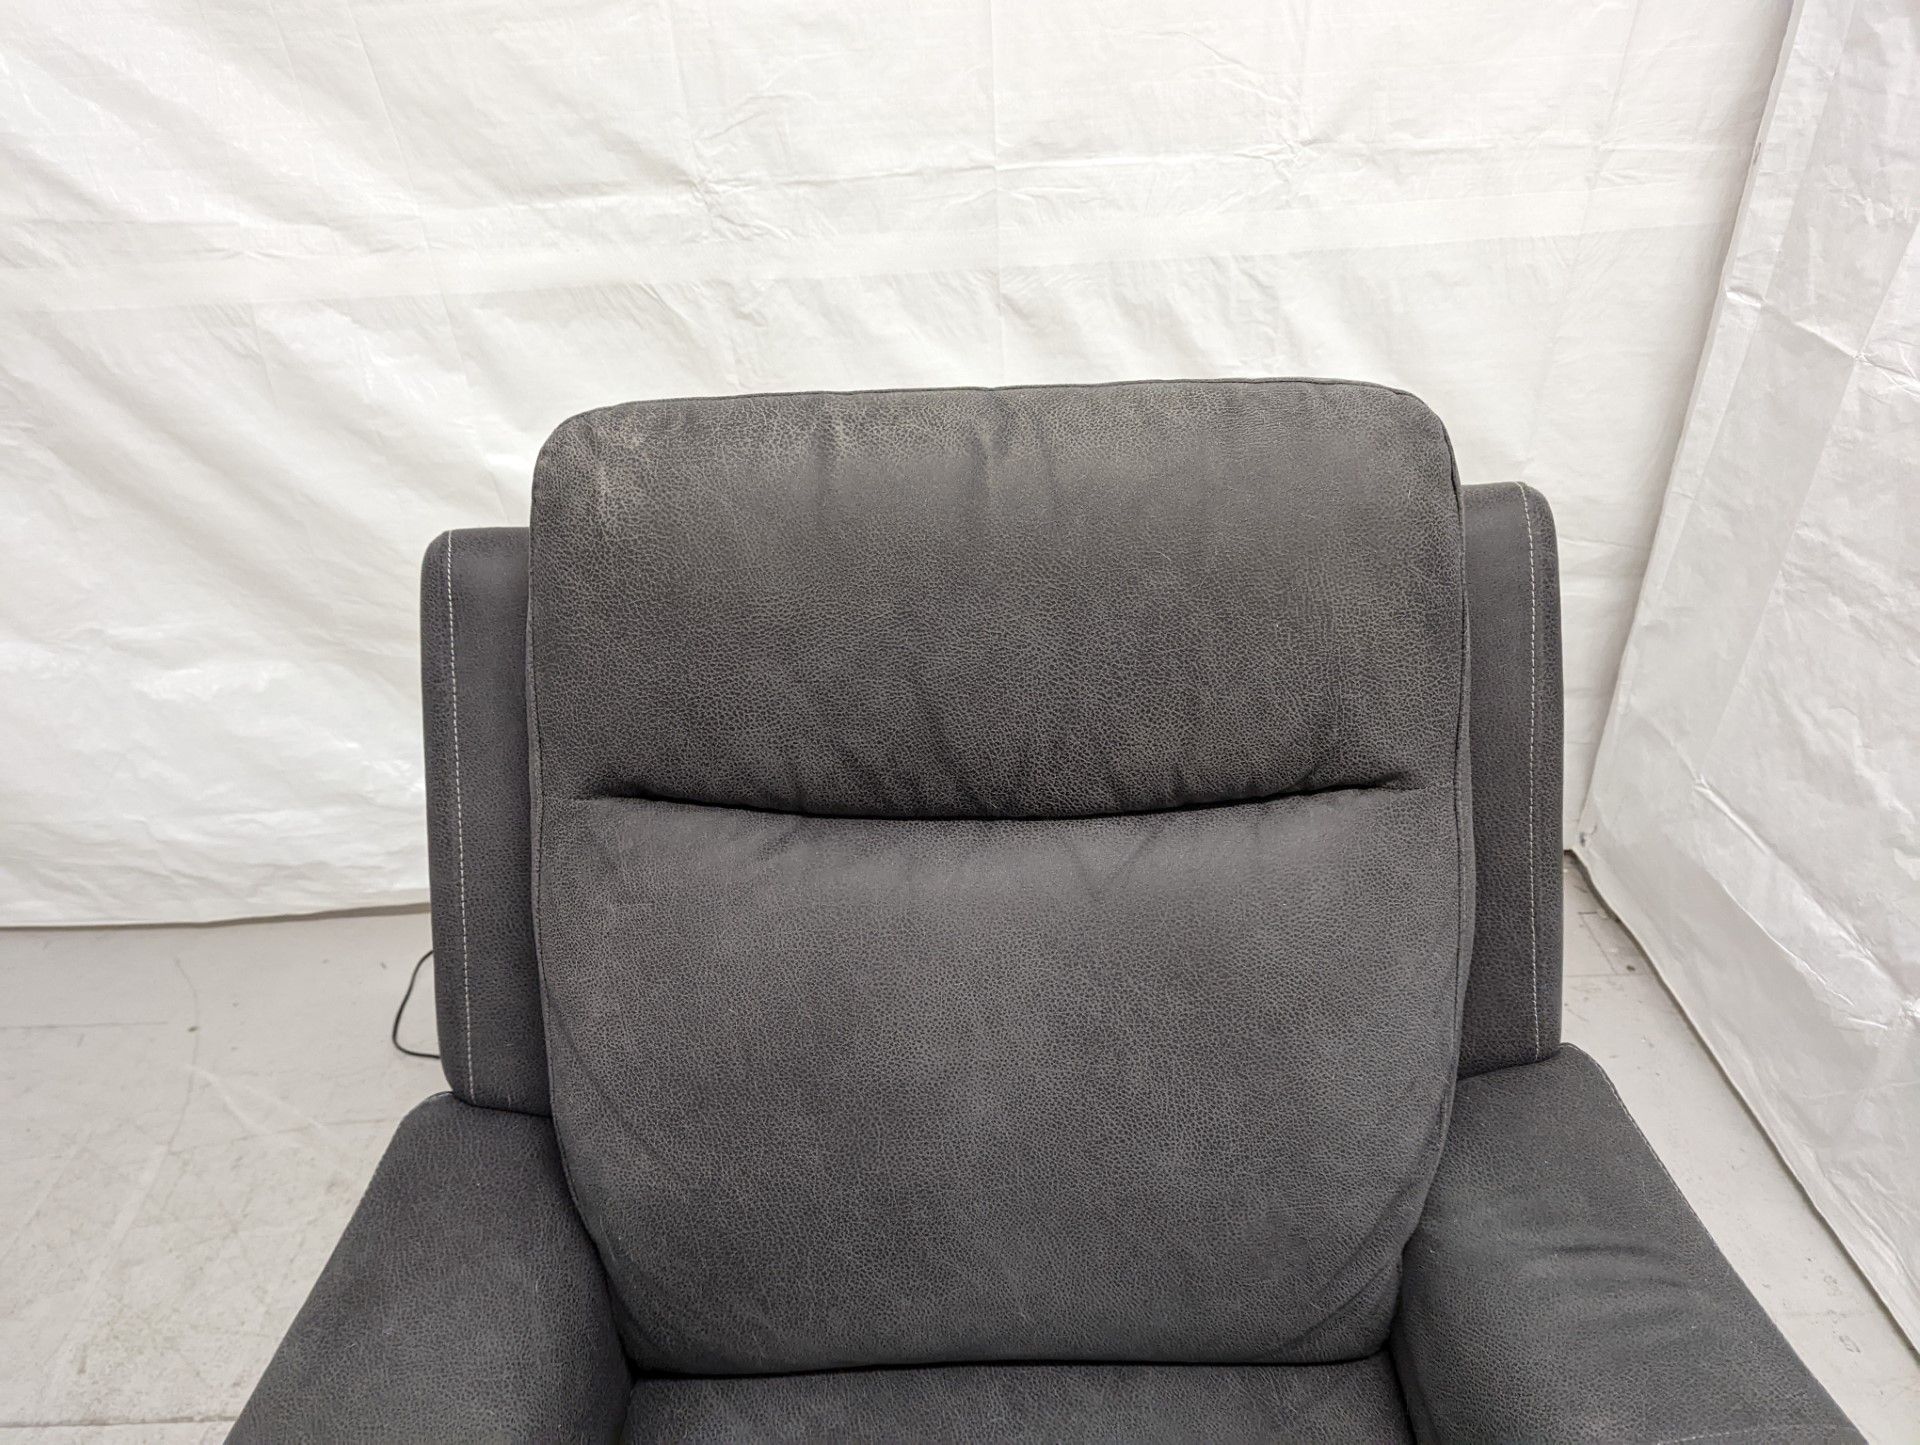 Endurance Morgan Power Recliner Chair Grey Kuka Black Plastic Feet Kuka RRP 696 About the Product(s) - Image 2 of 2